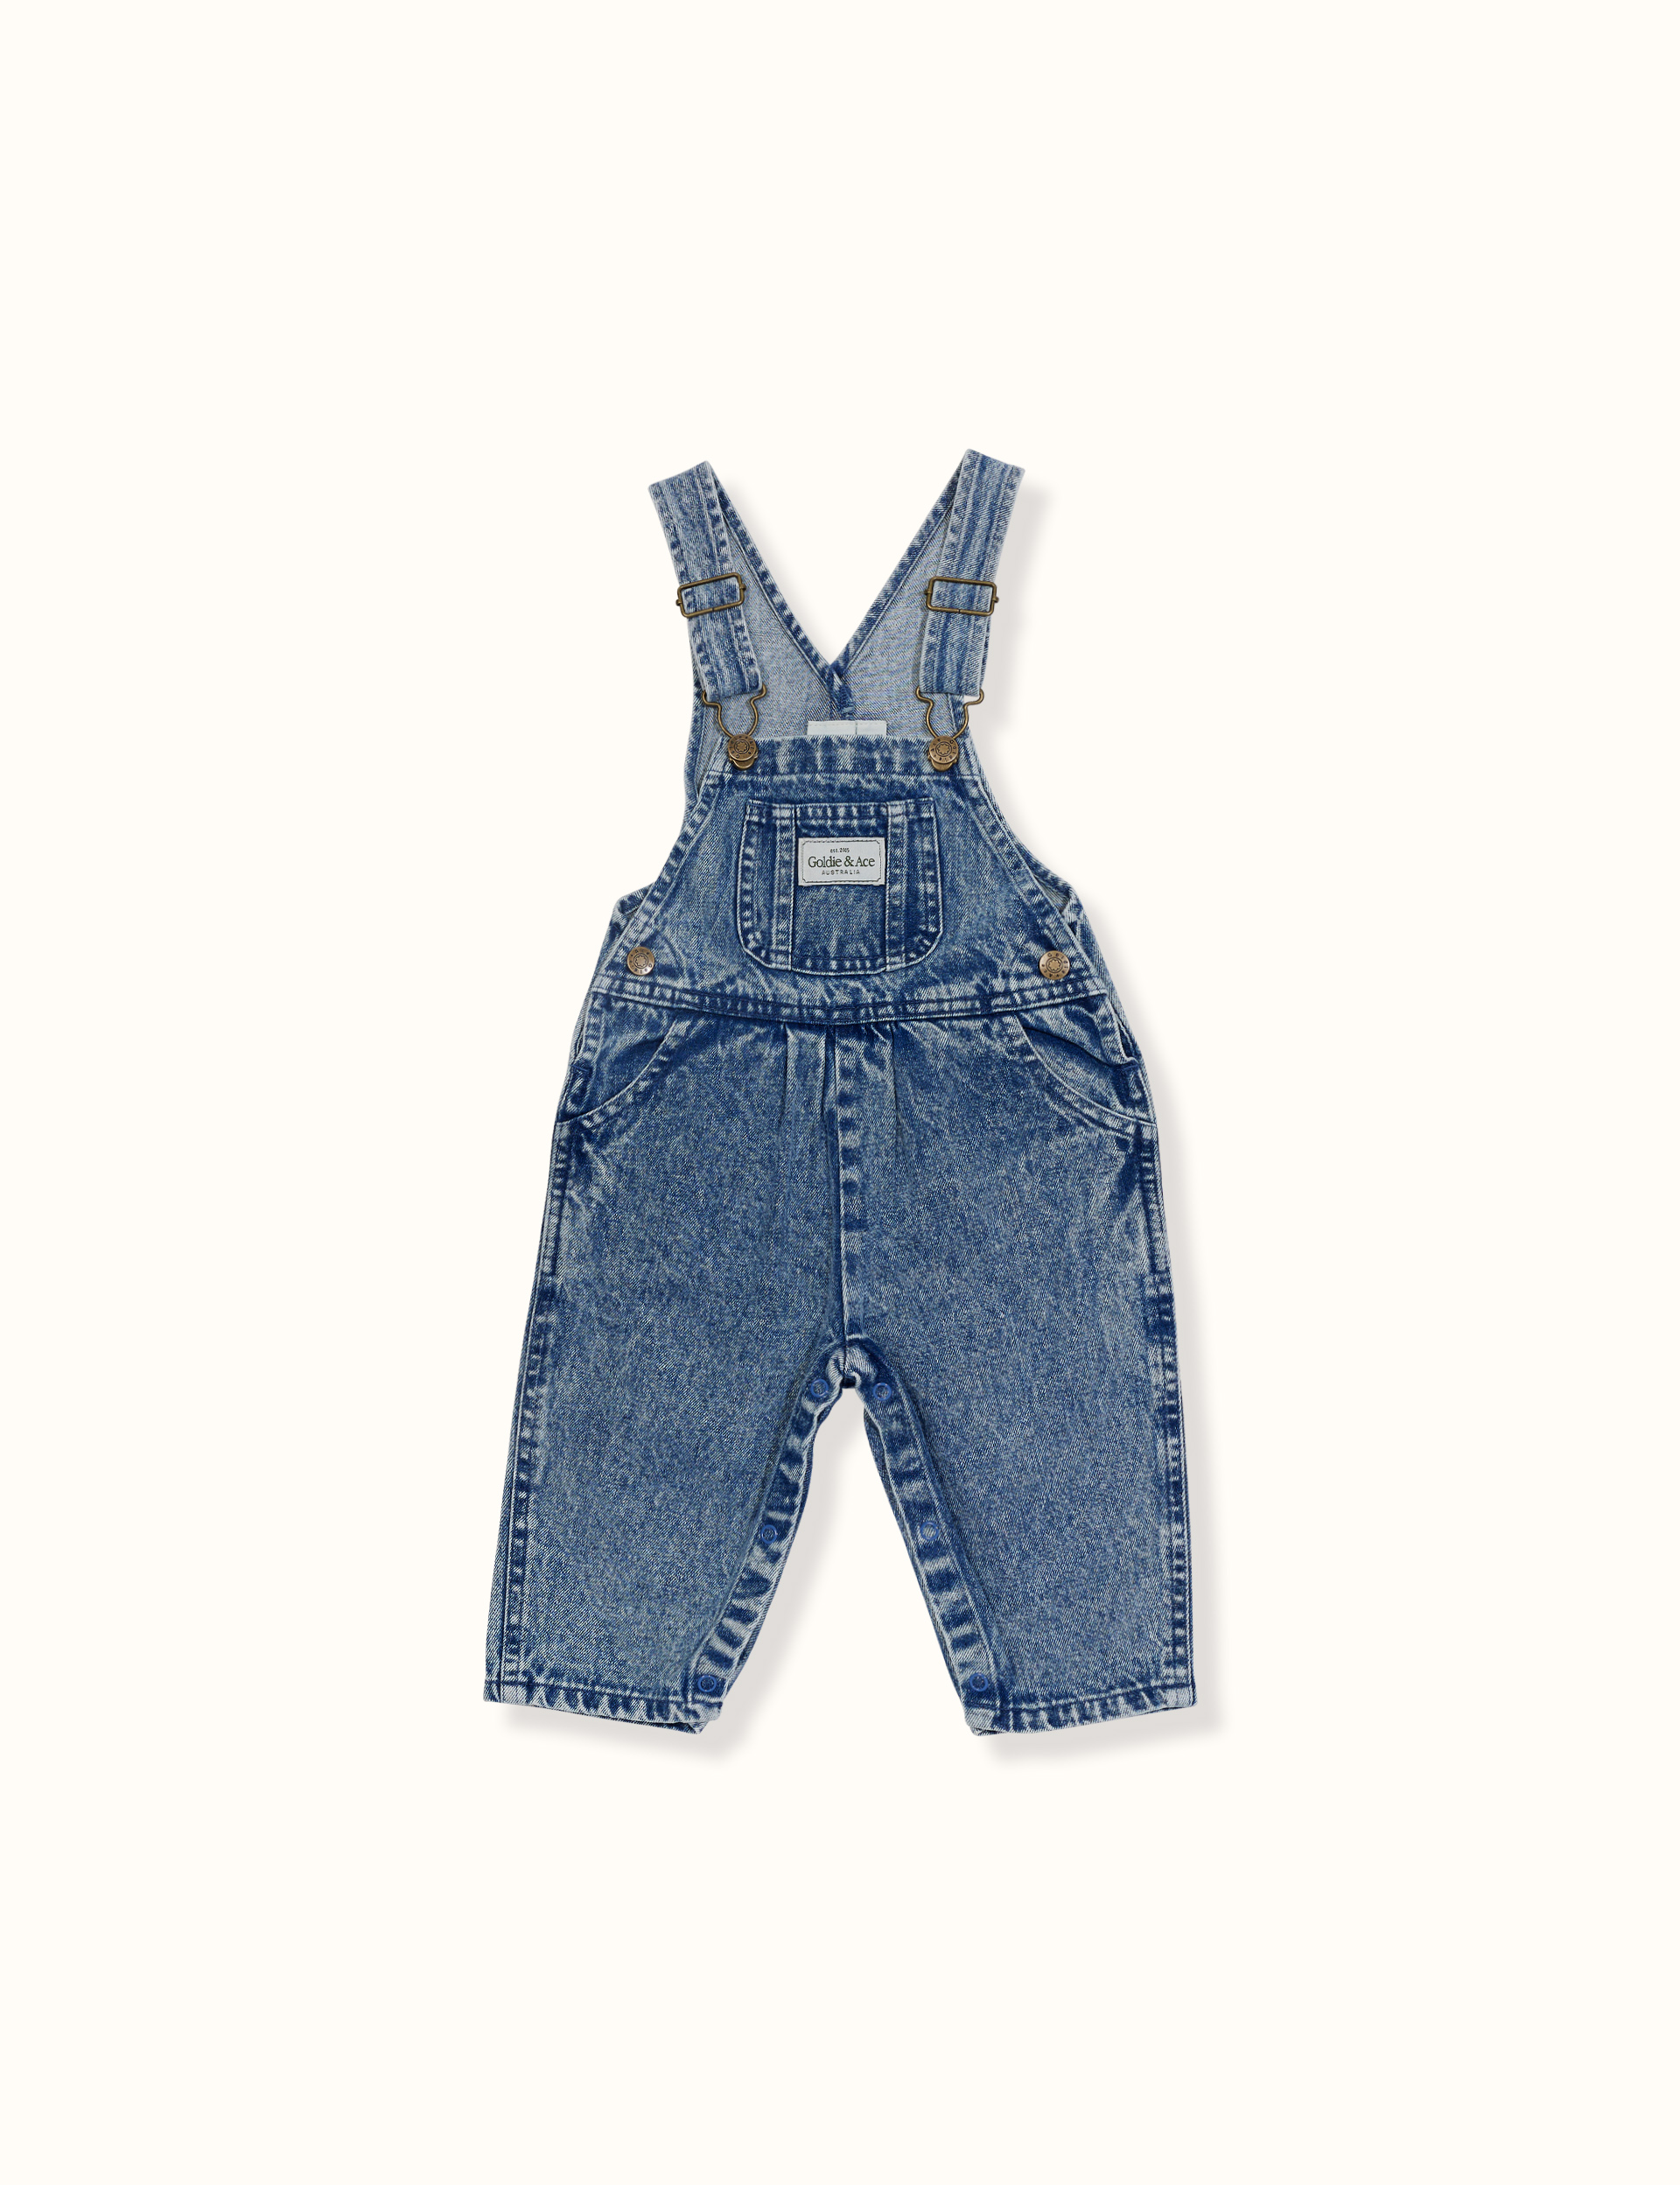 Whitney Denim Carpenter Double Knee Dungarees in Stone Wash - Glue Store